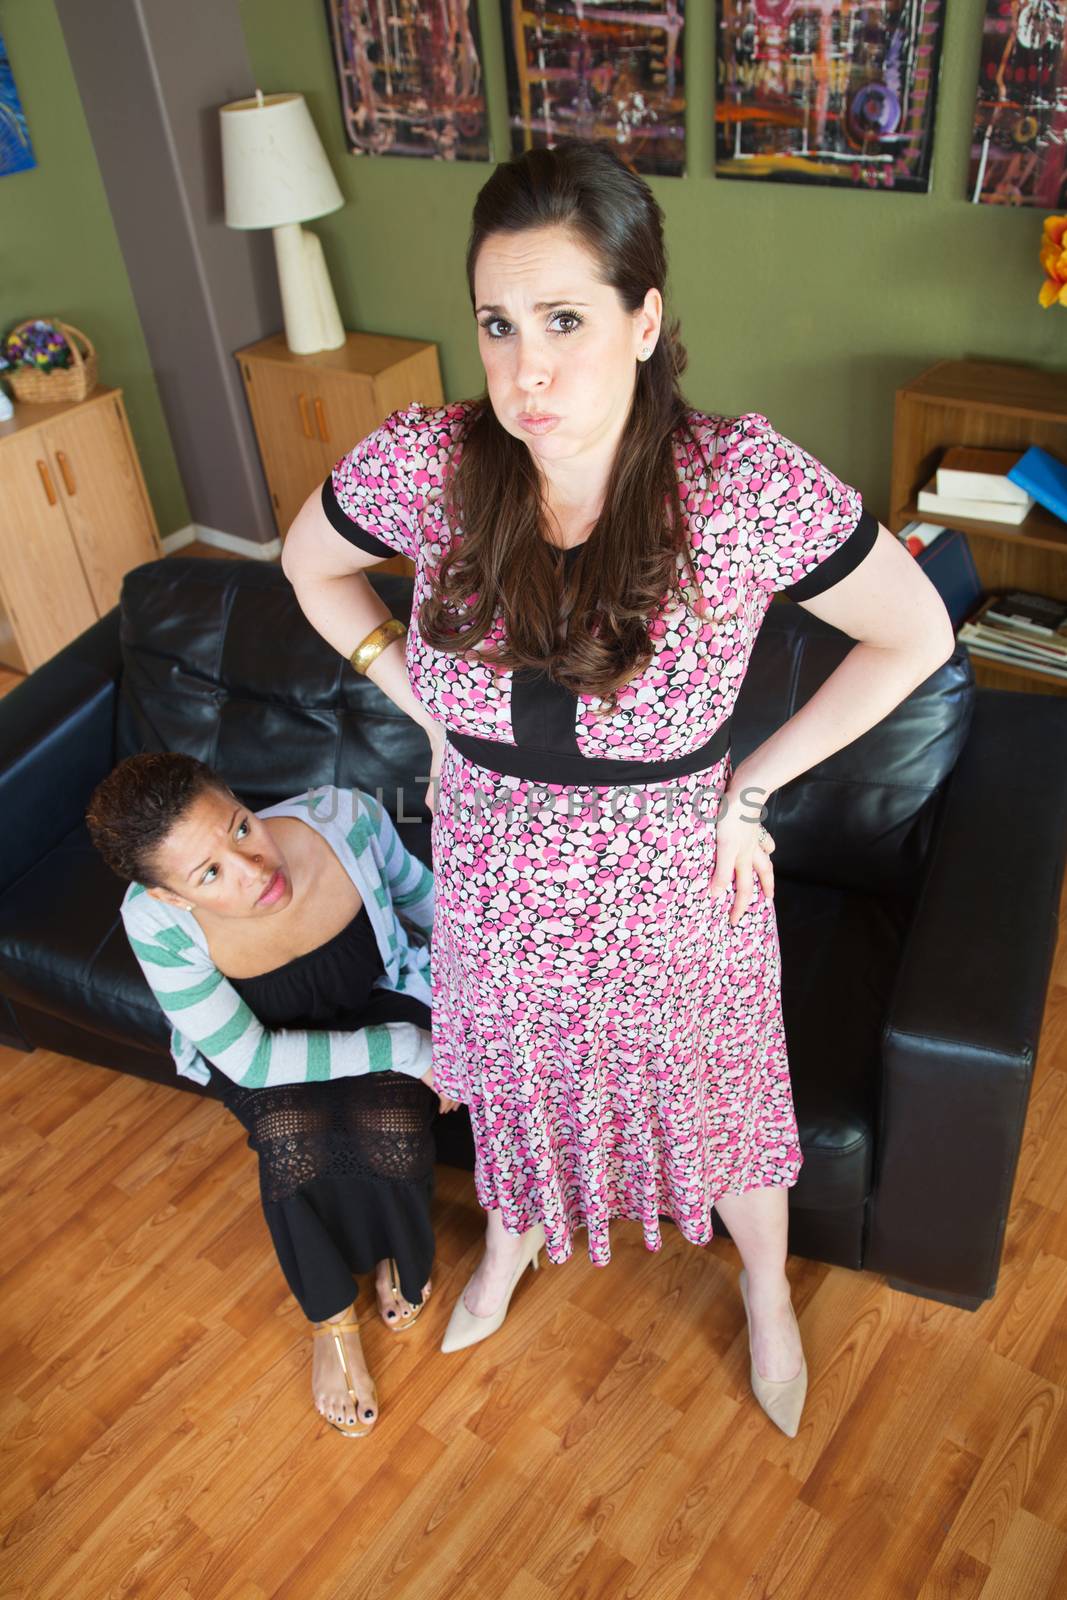 Female spouse with fatigued pregnant woman with hands on hips